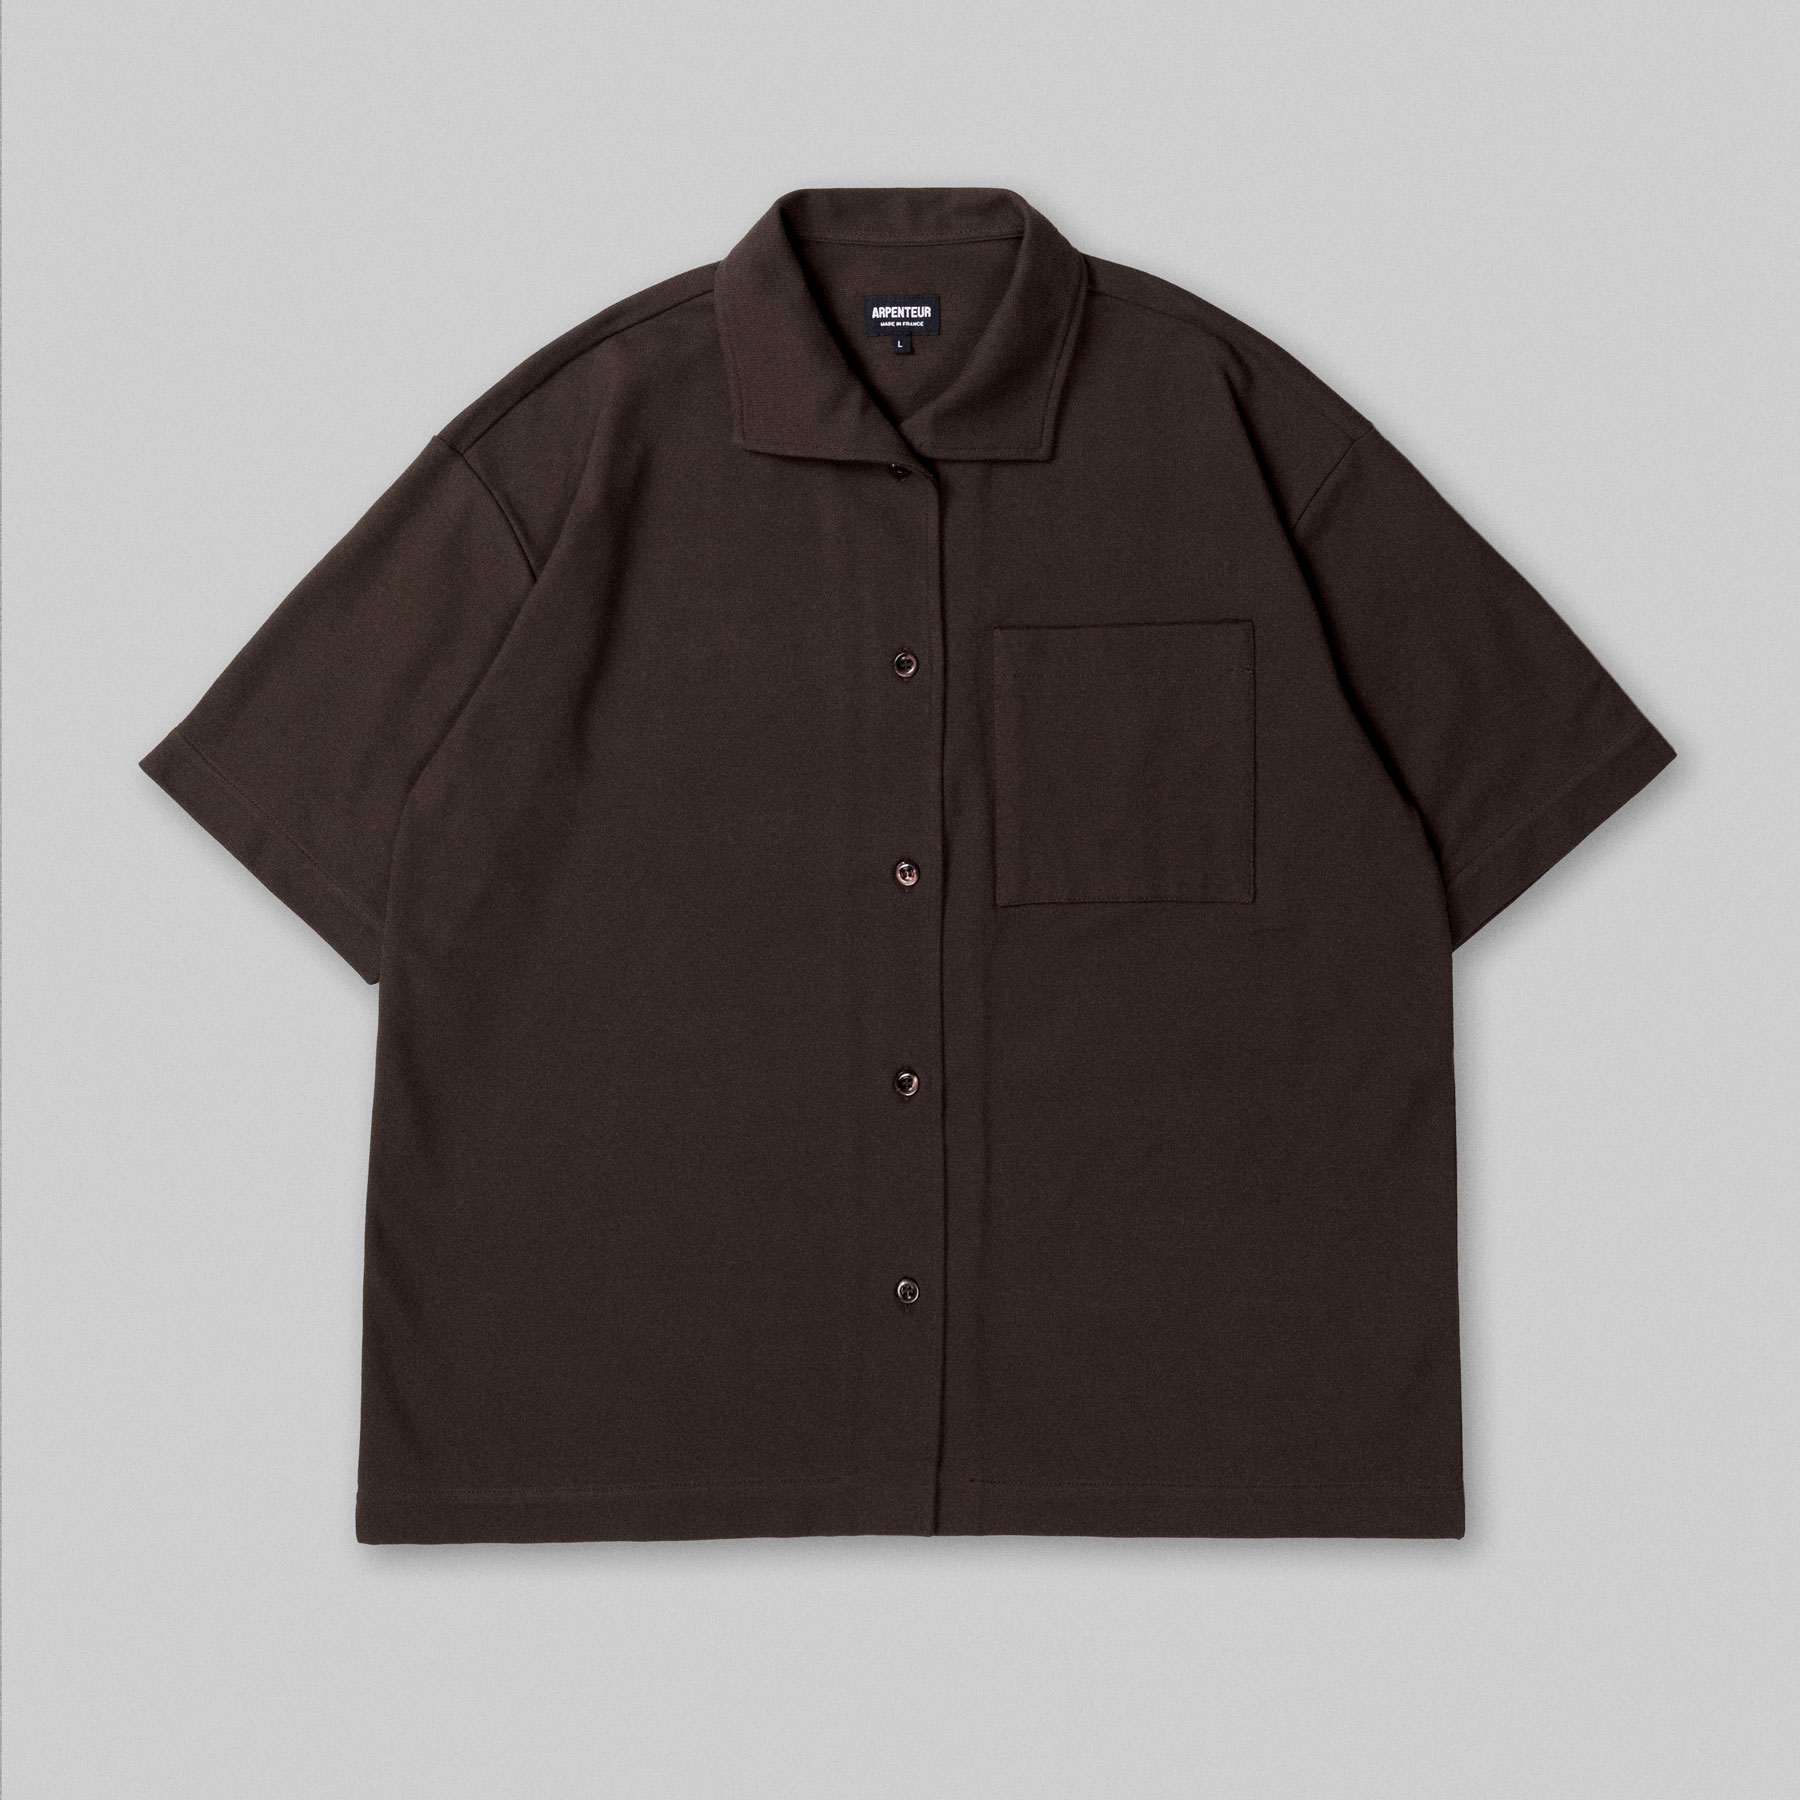 CORAL short sleeve shirt by Arpenteur in Soil brown color